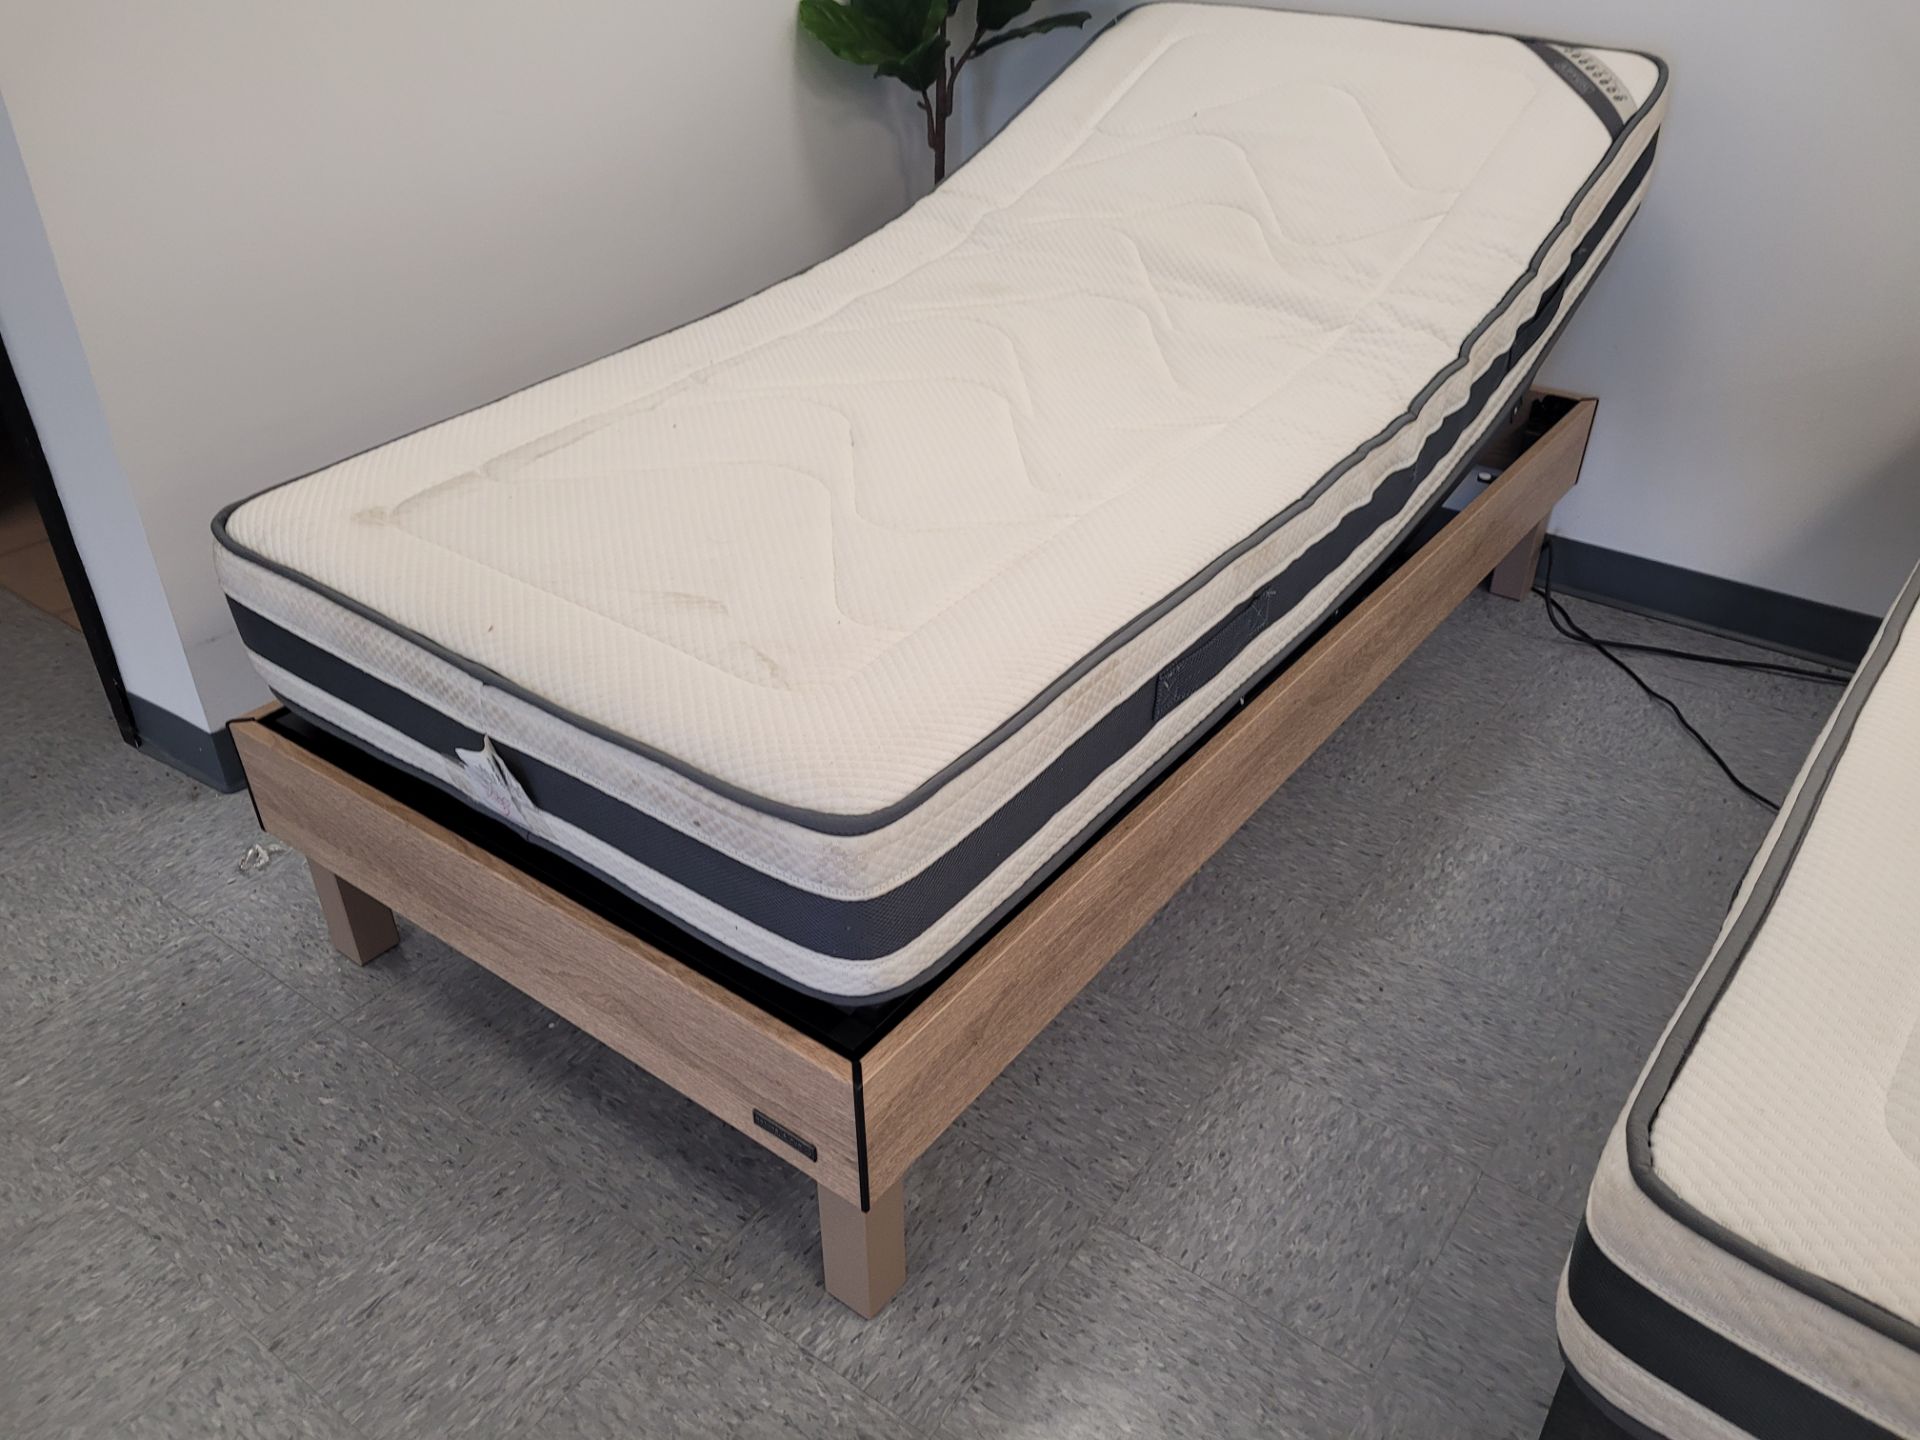 NATURE & PUR Memory Foam Mattress mod. ROYAL LUXE V2, size: SIMPLE XL, 38" x 79.5", hypoallergenic, - Image 3 of 4